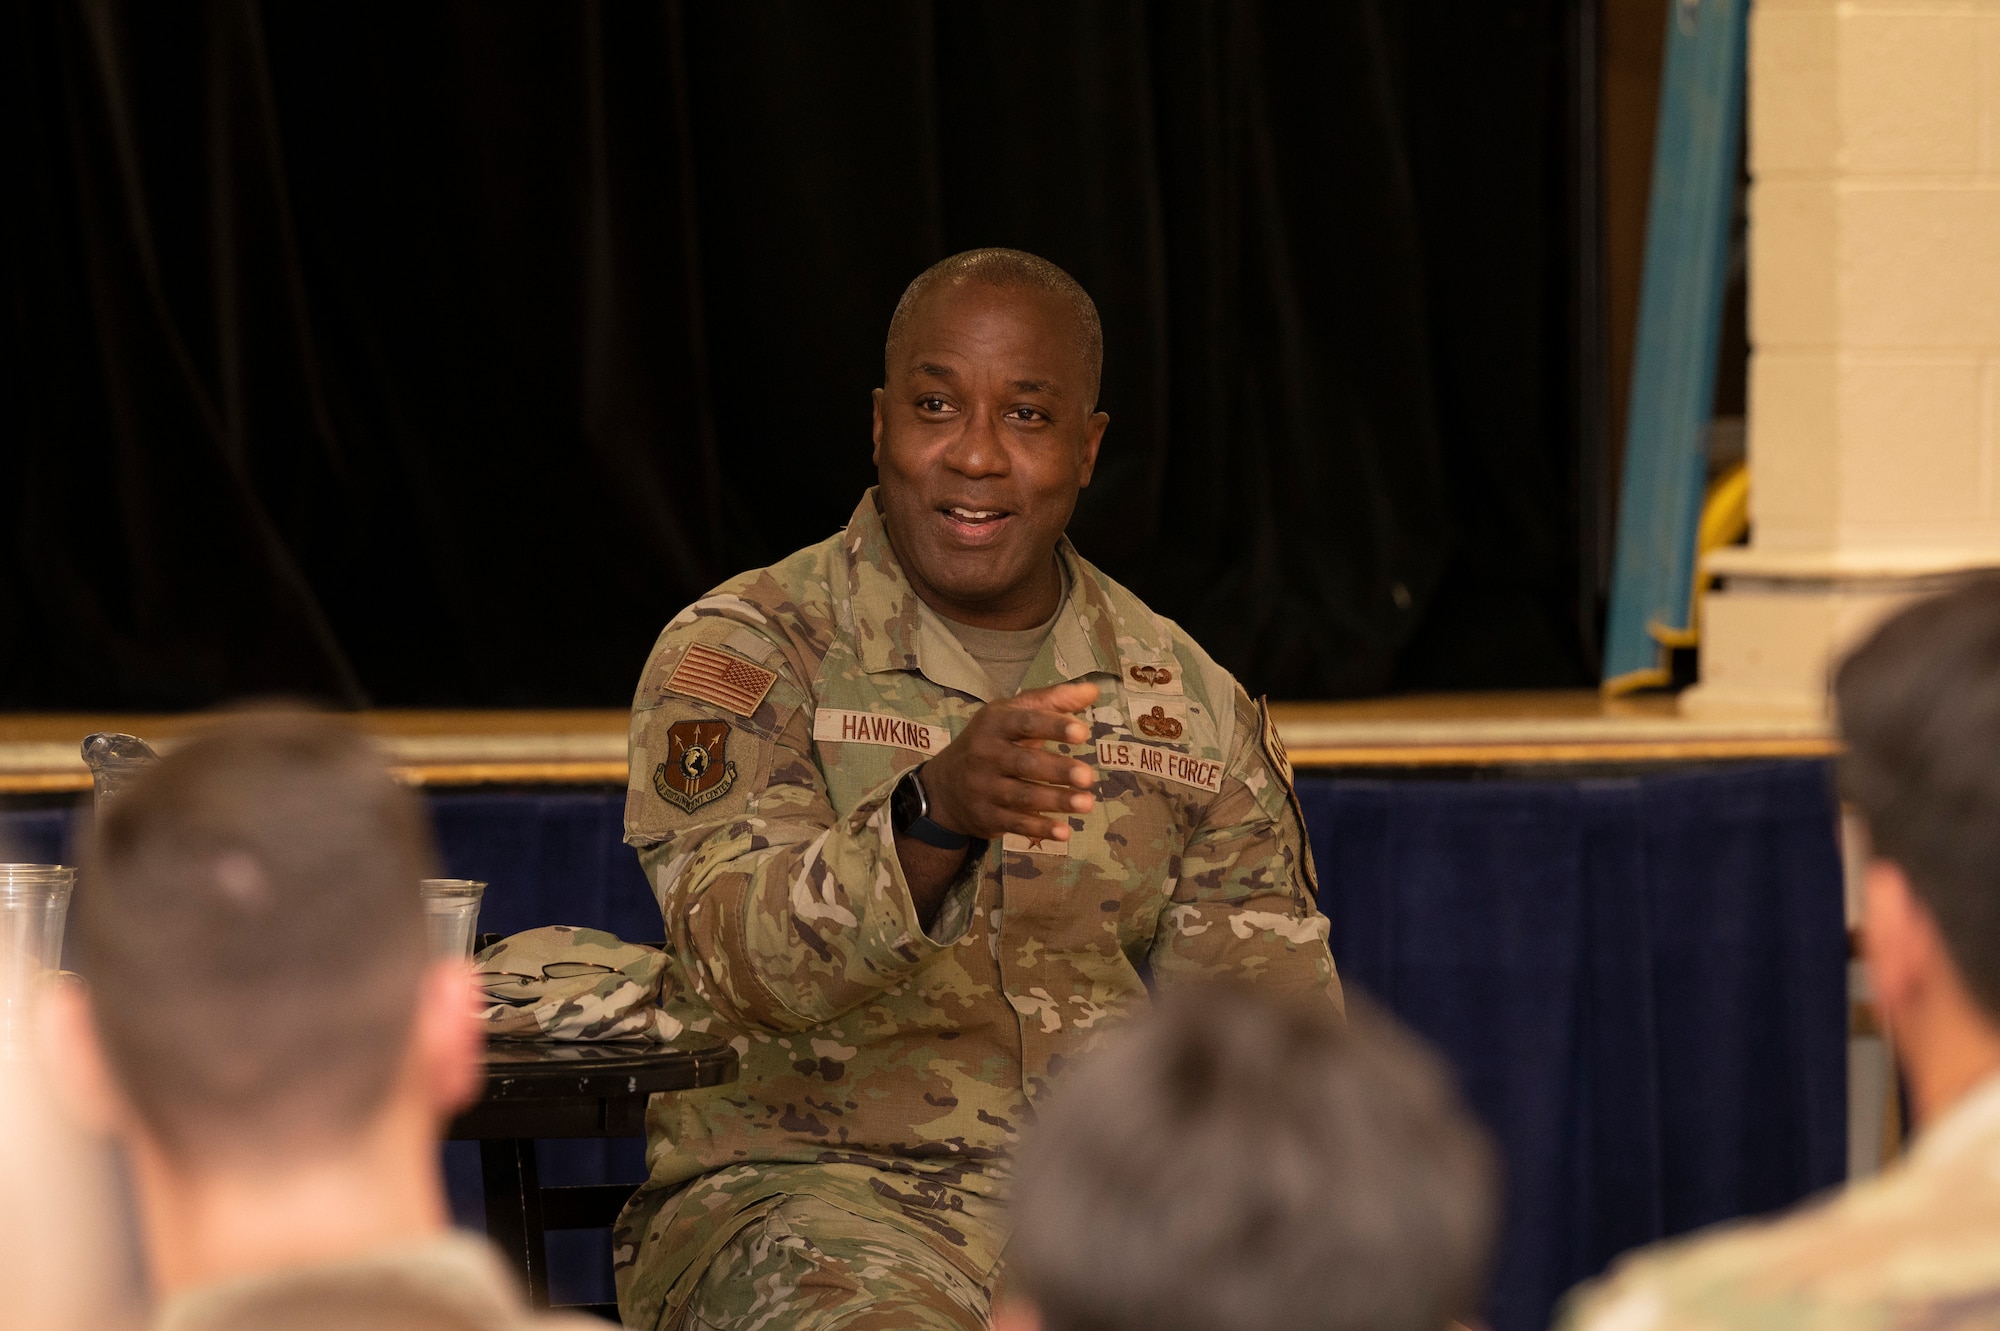 U.S. Air Force Lt. Gen. Stacey Hawkins, Air Force Sustainment Center commander, speaks to Airmen from the 635th Materiel Maintenance Group at Holloman Air Force Base, New Mexico, Dec. 6, 2022. Hawkins' tour of the base helped provide a detailed account to the capabilities the 635th MMG has when providing the resources and training environment needed in a deployment. (U.S. Air Force photo by Airman 1st Class Isaiah Pedrazzini